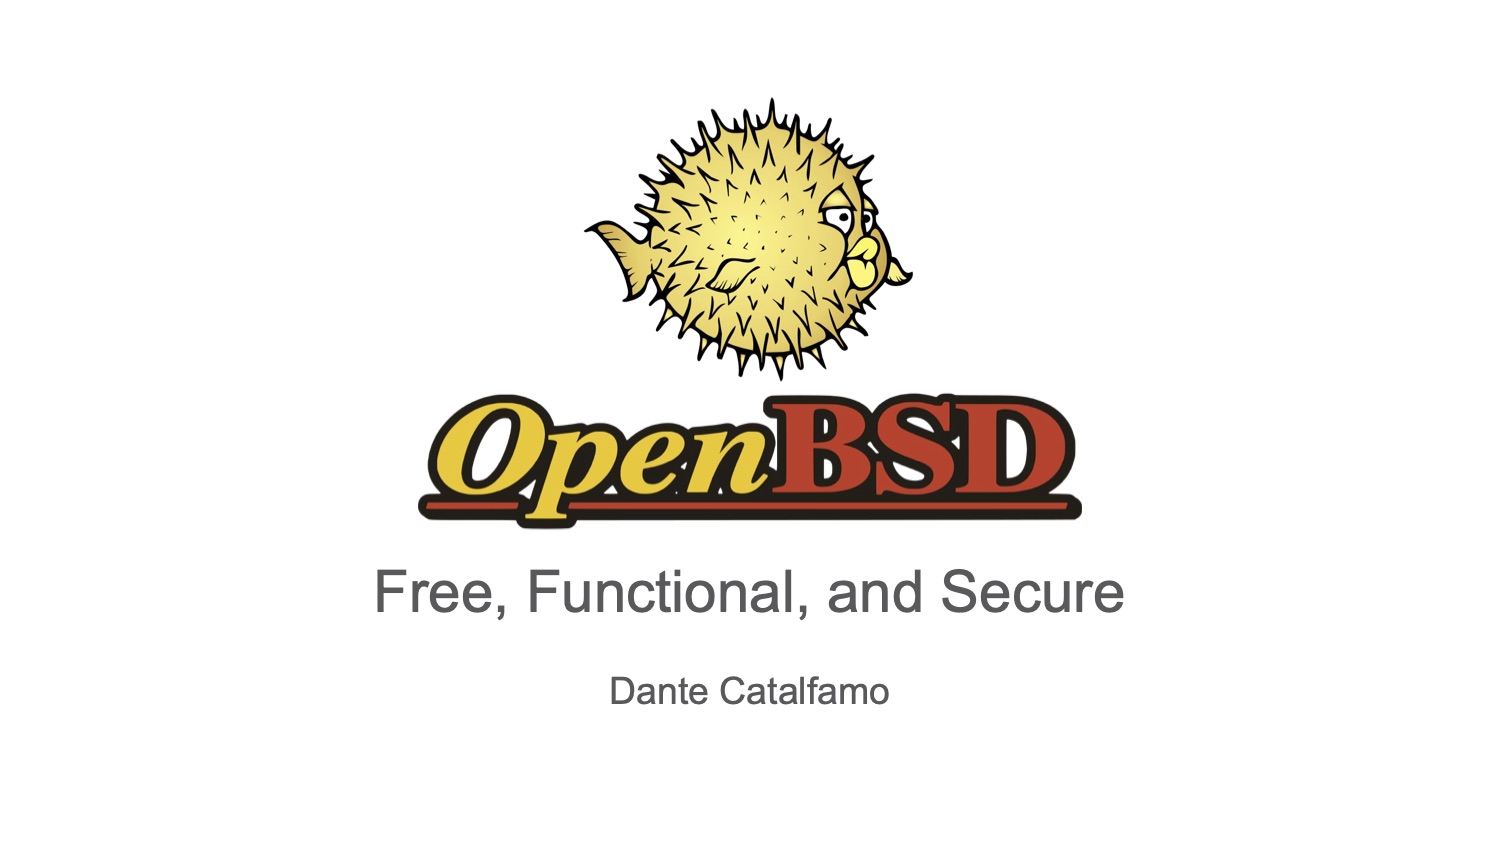 The first slide of the OpenBSD introduction presentation